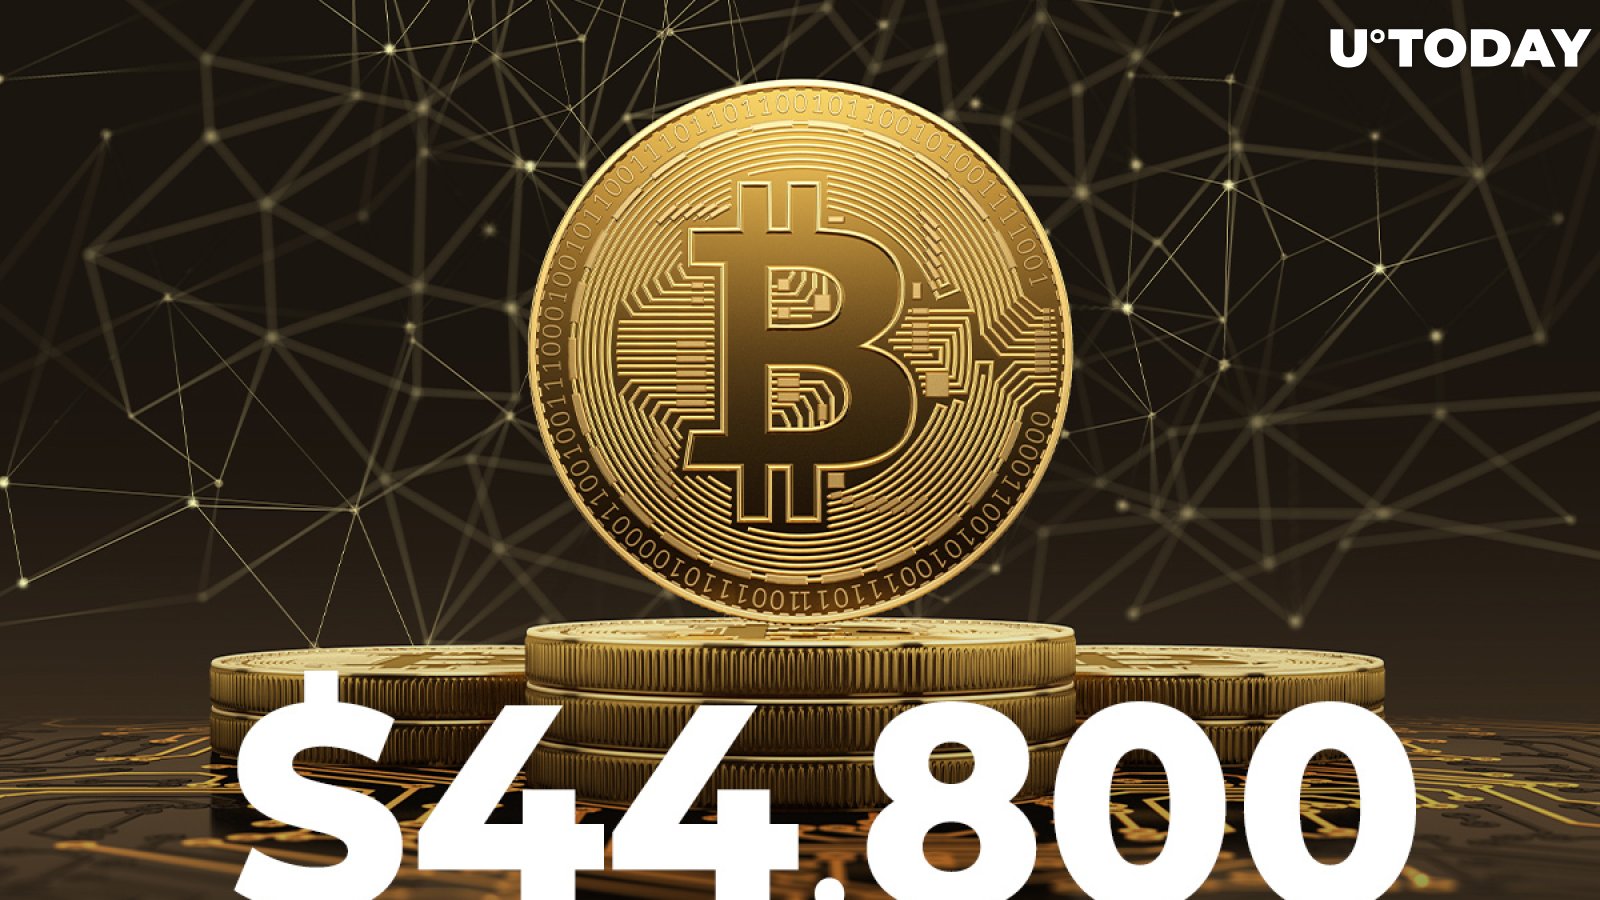 Bitcoin Hits New All-Time High of $44,800 as Tesla Embraces BTC